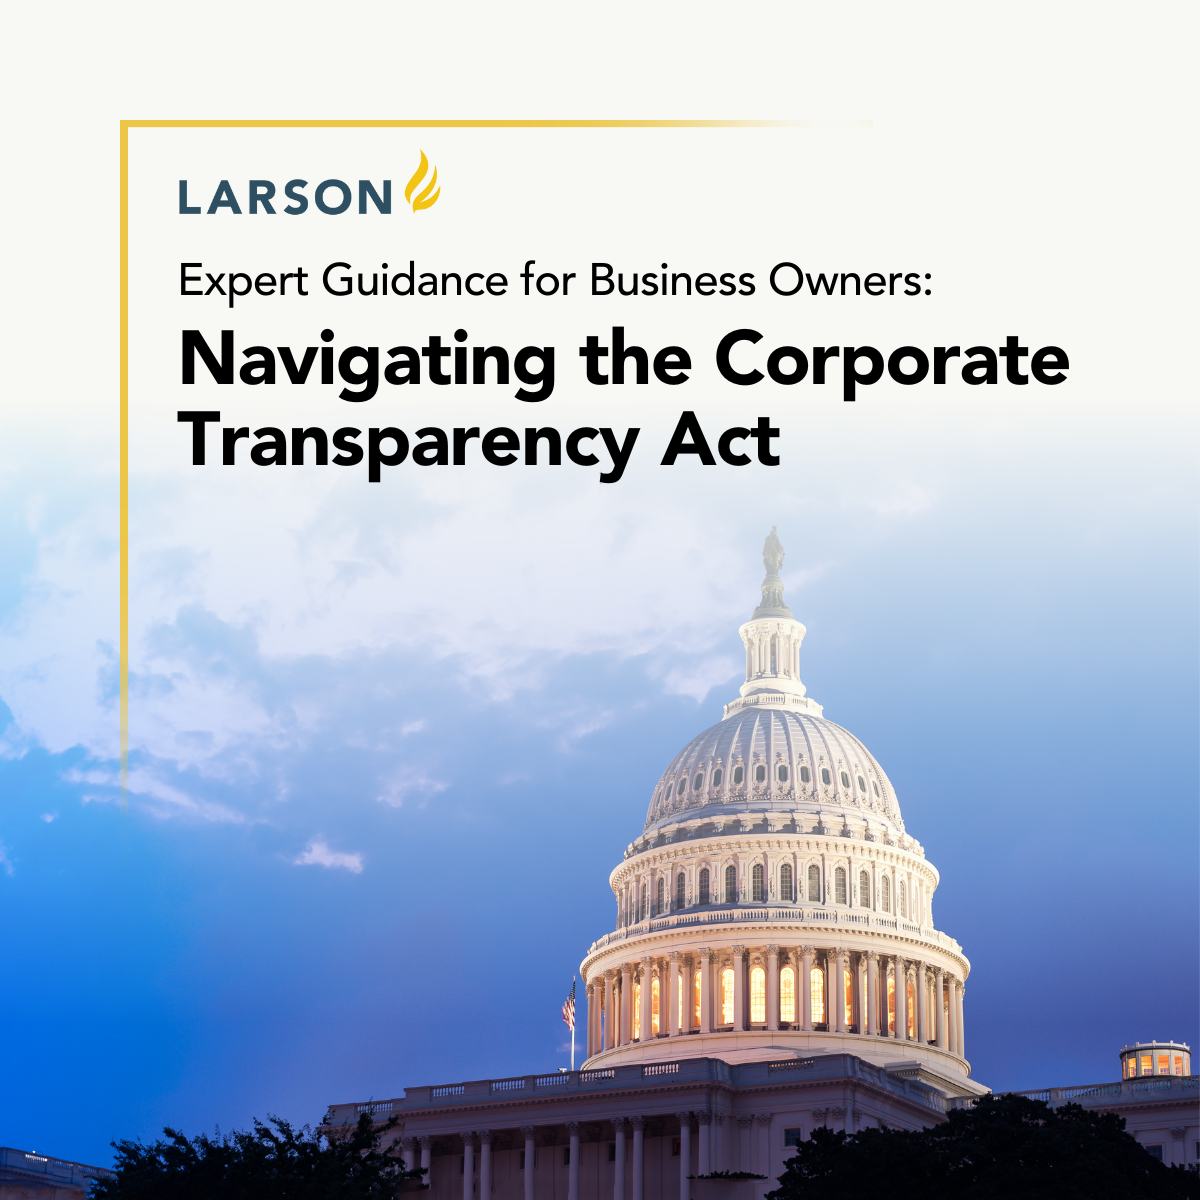 Compliance Requirements Under the Corporate Transparency Act